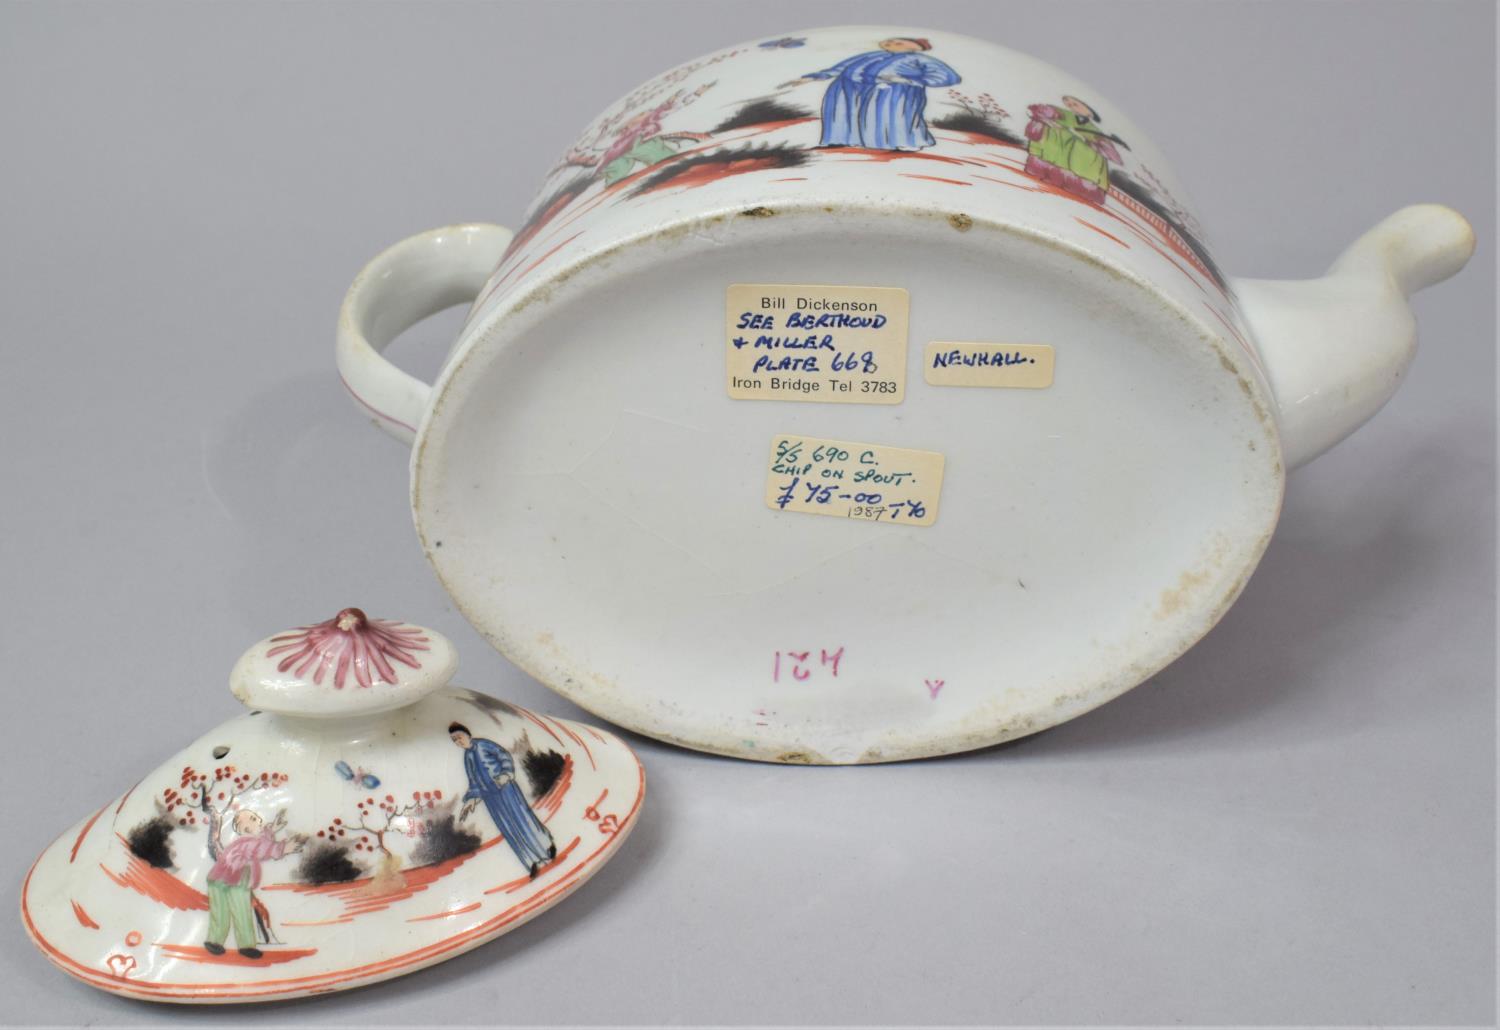 An 18th Century Newhall Teapot of Oval form Decorated with 'Boy and Butterfly' Pattern, Bill - Image 3 of 3